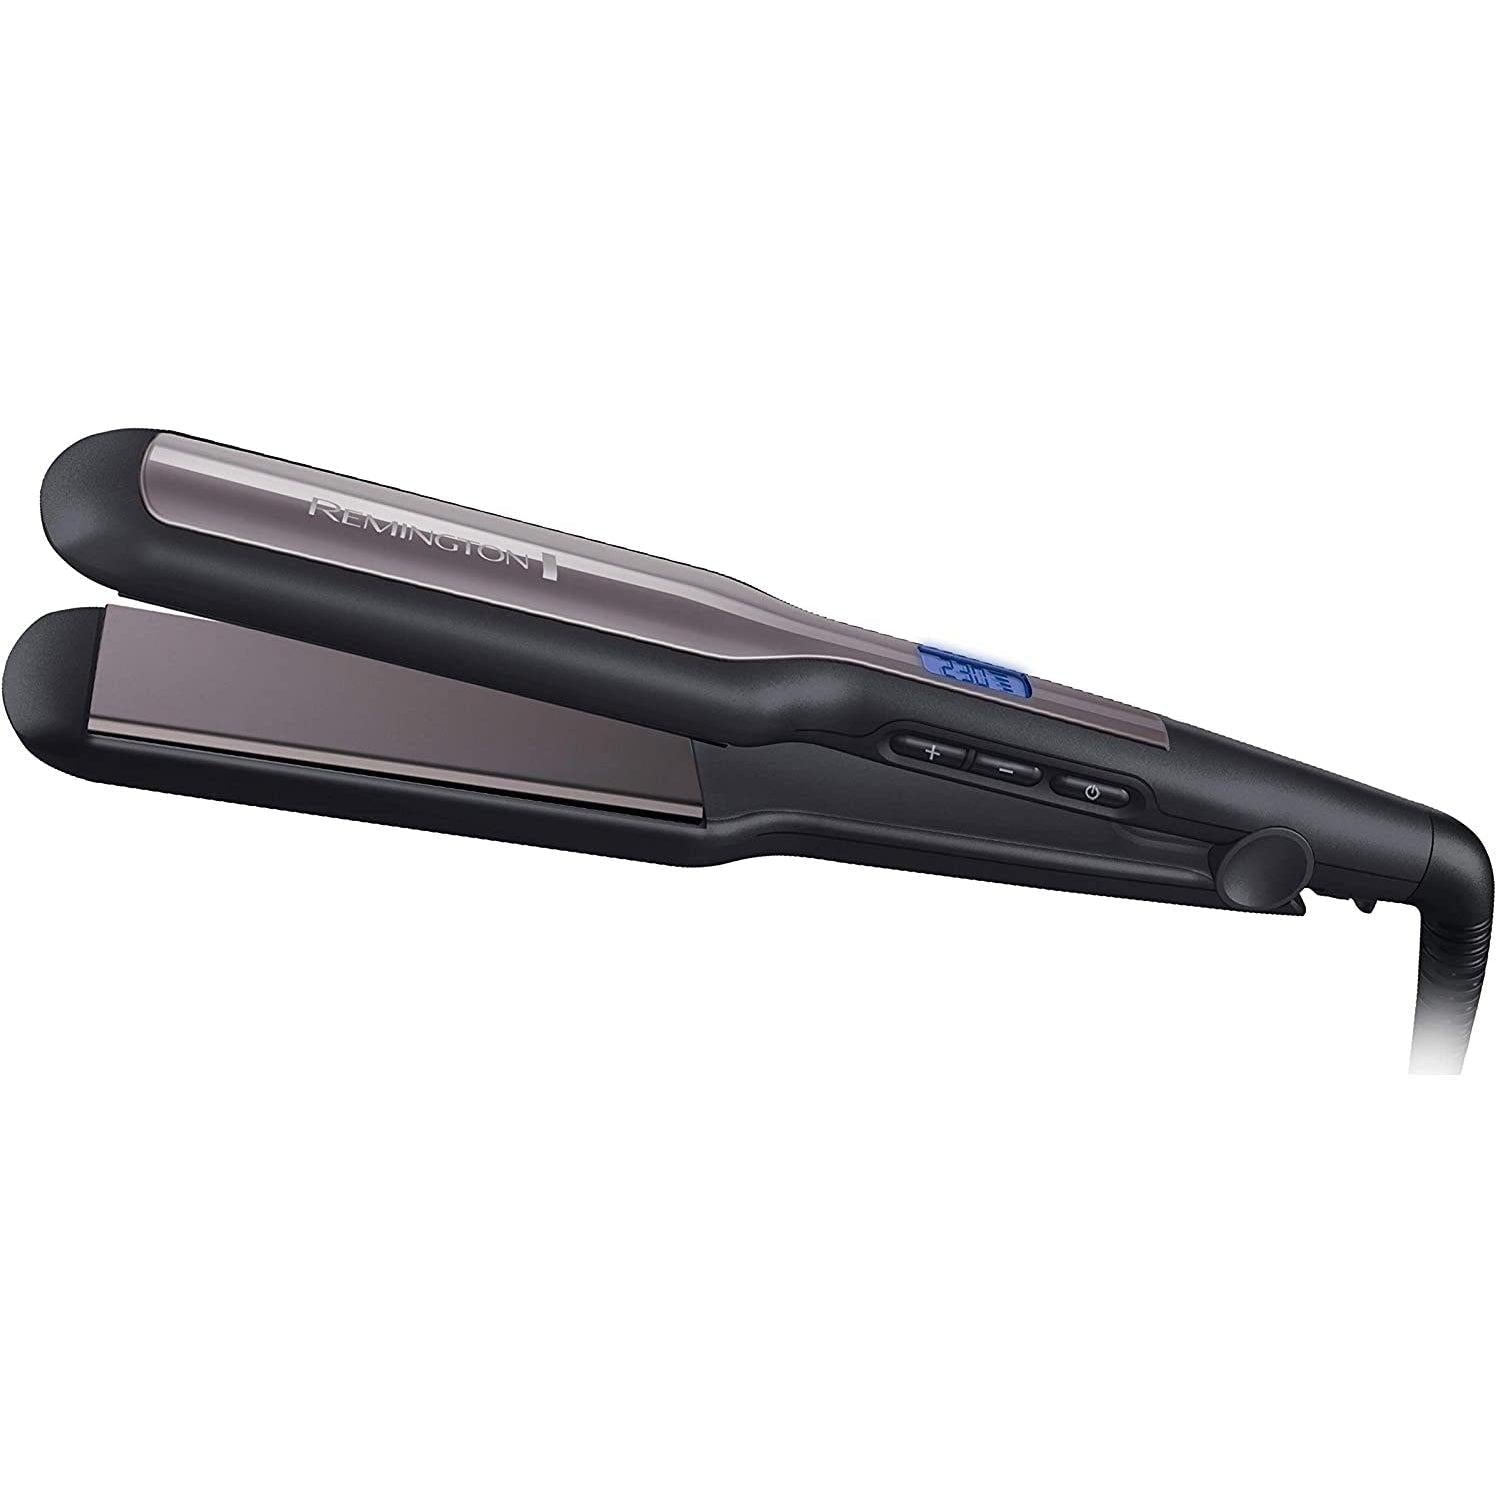 Remington Pro-Ceramic Extra Wide Plate Hair Straighteners for Longer Thicker Hair, Digital Temperature Control - S5525 - Healthxpress.ie